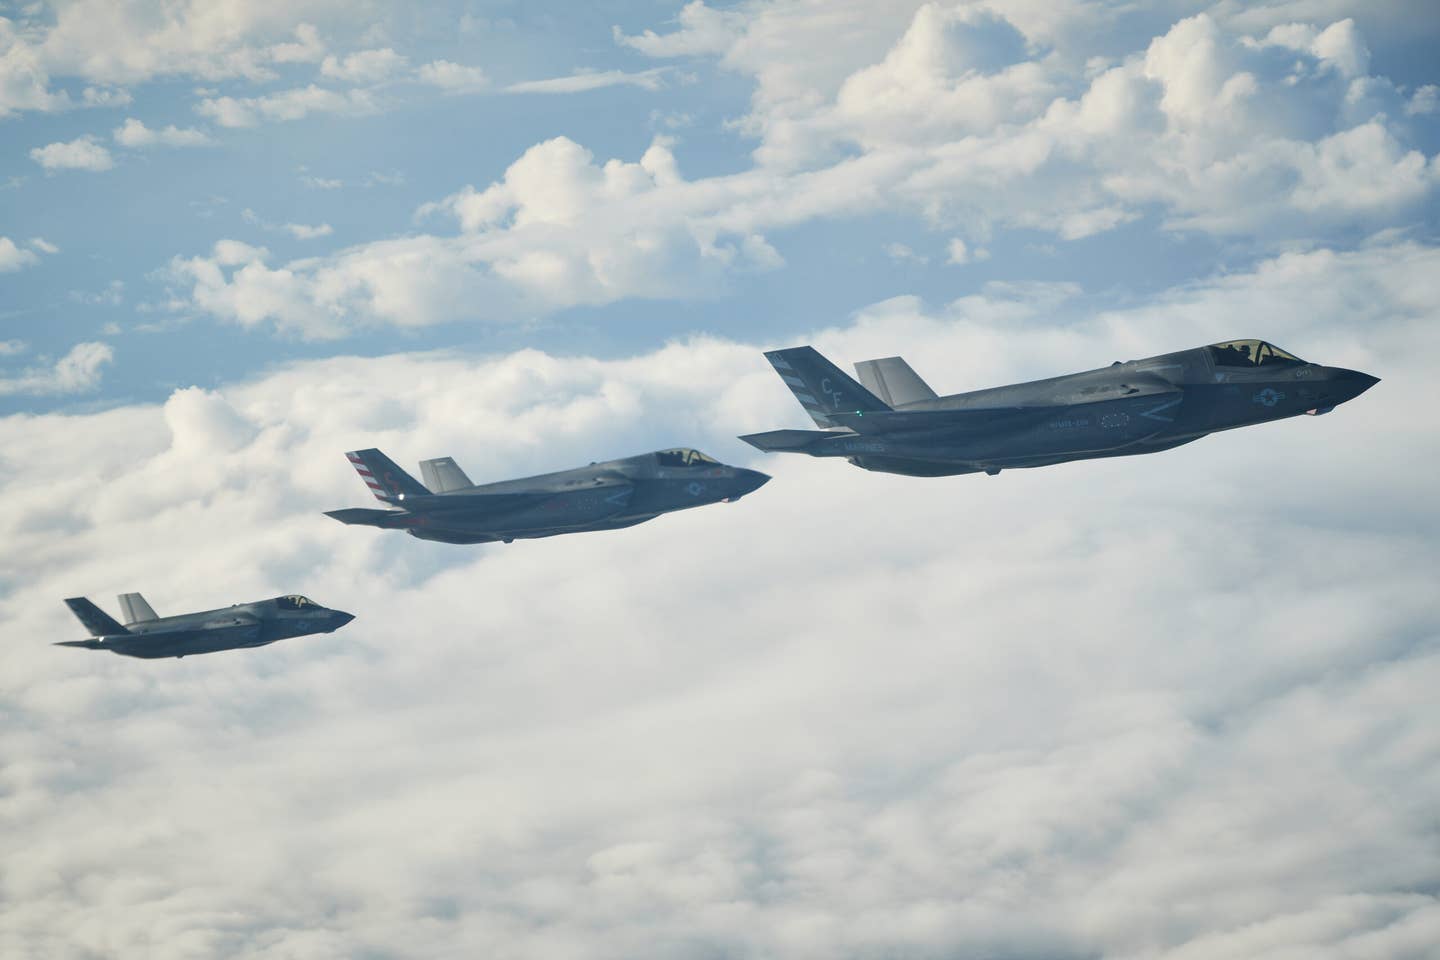 Three F-35B combat aircraft from the United States Marine Corp prepare to refuel from an RAF Voyager aircraft over the North Sea on Oct. 08, 2020 in flight, above Scotland. (Photo by Leon Neal/Getty Images)